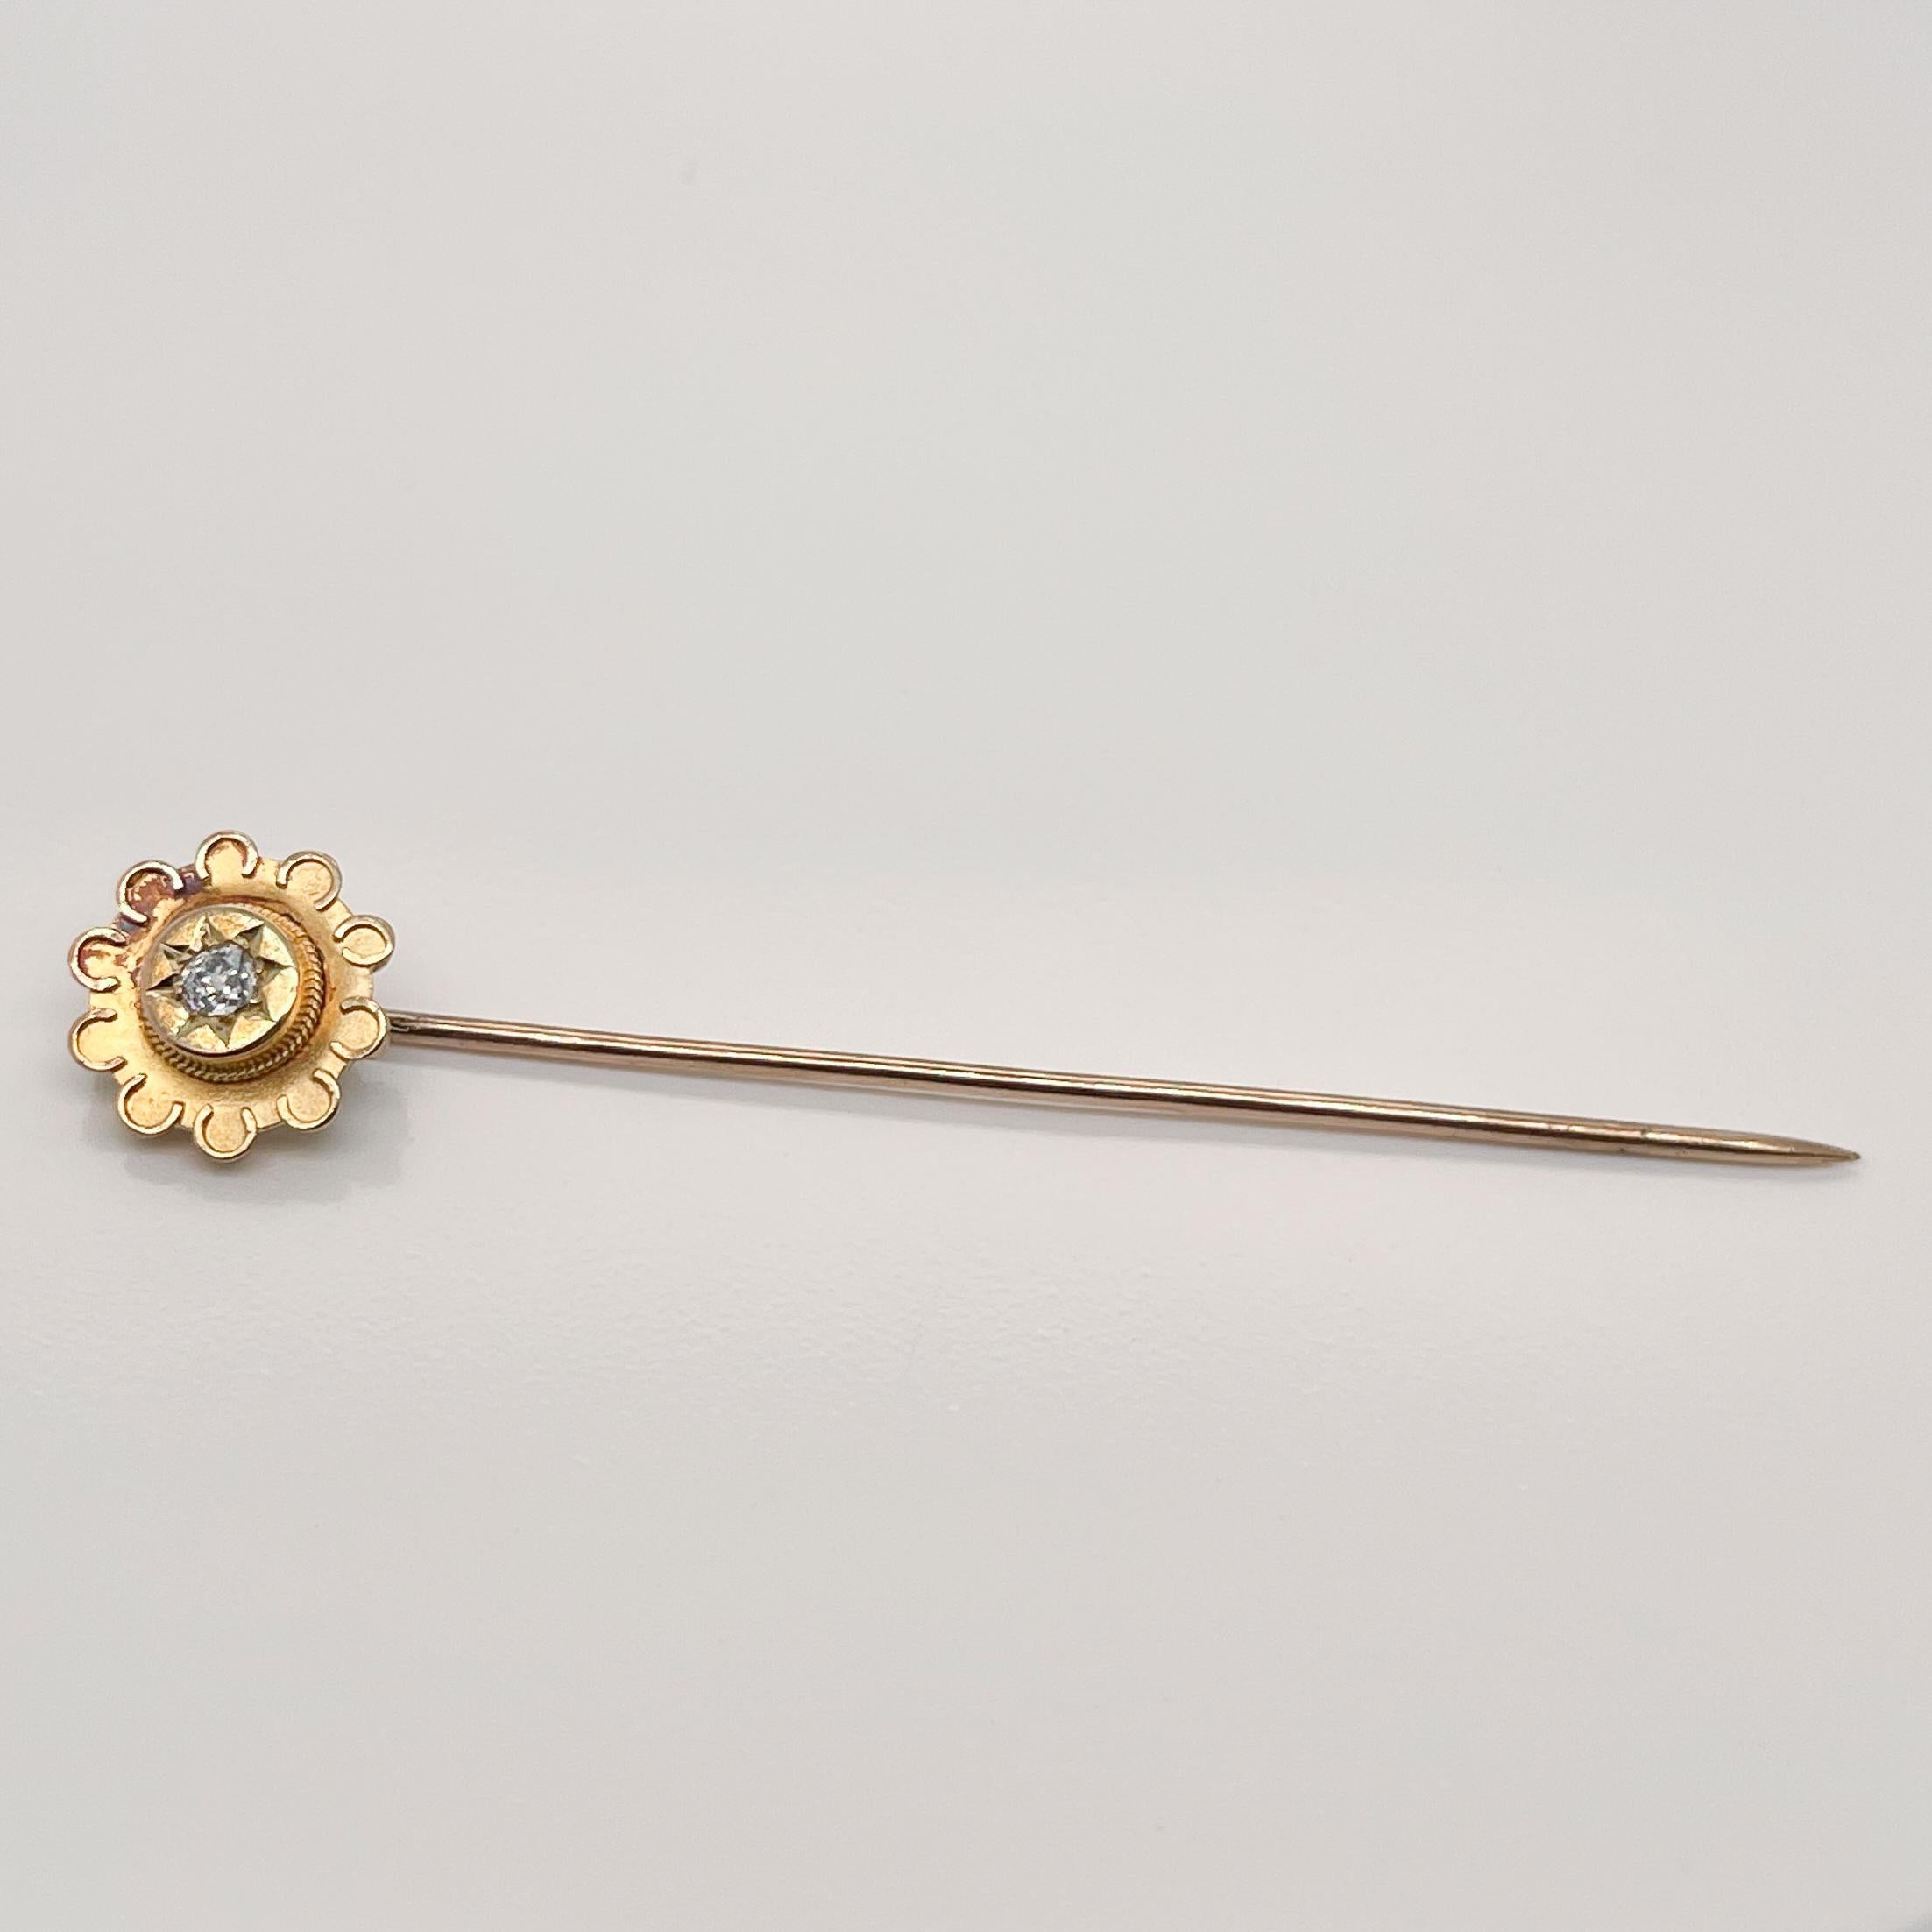 A very fine 14k gold and diamond stick pin.

Converted from a Late Victorian larger piece of jewelry.

With a round brilliant cut diamond pave set in center of a 14k gold flower shaped top.

Simply a great stickpin!

Date:
19th Century

Overall